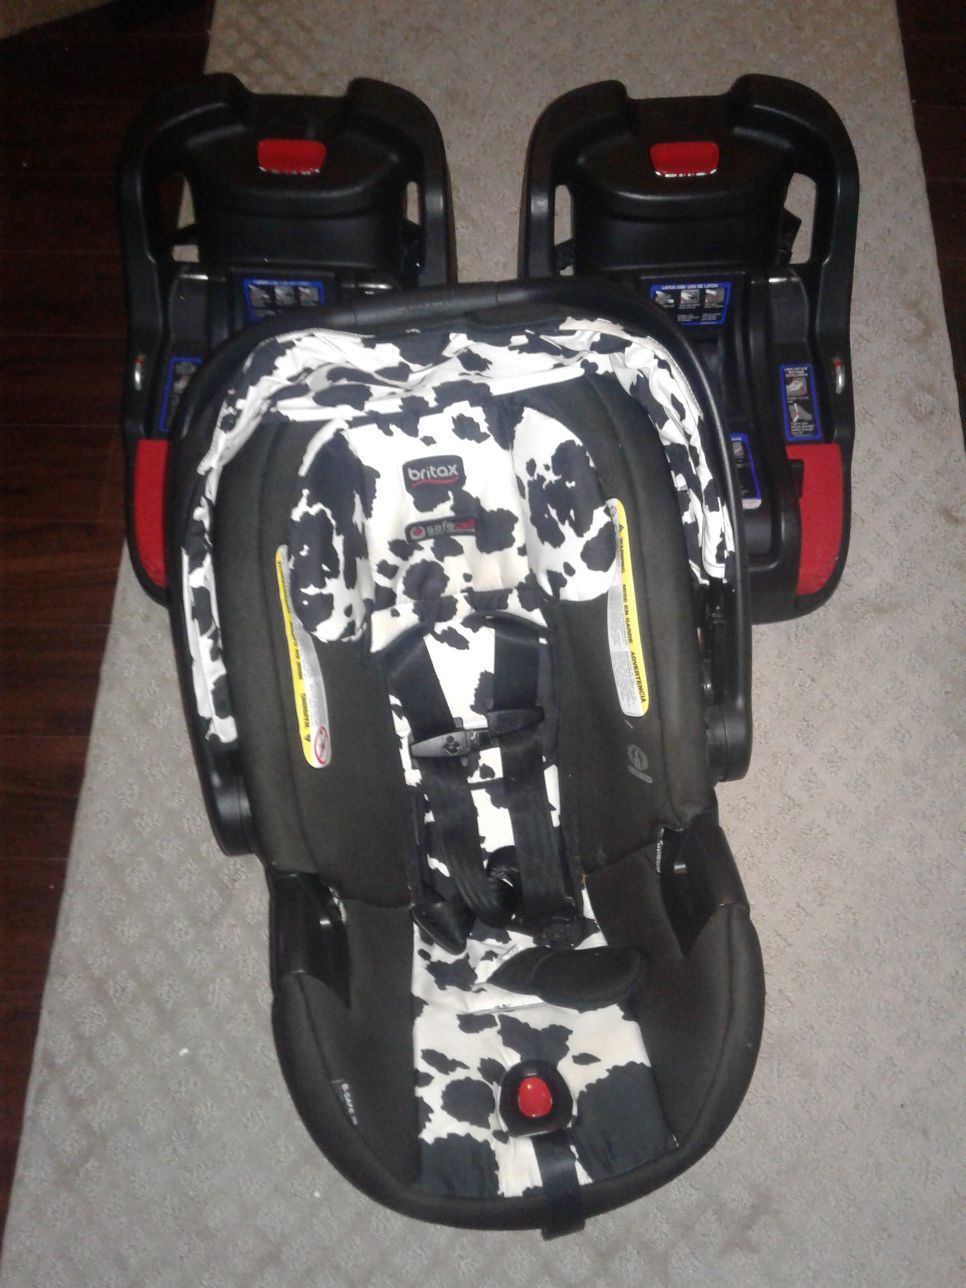 Britax b-safe ultra infant car seat- cowmooflauge and 2 bases